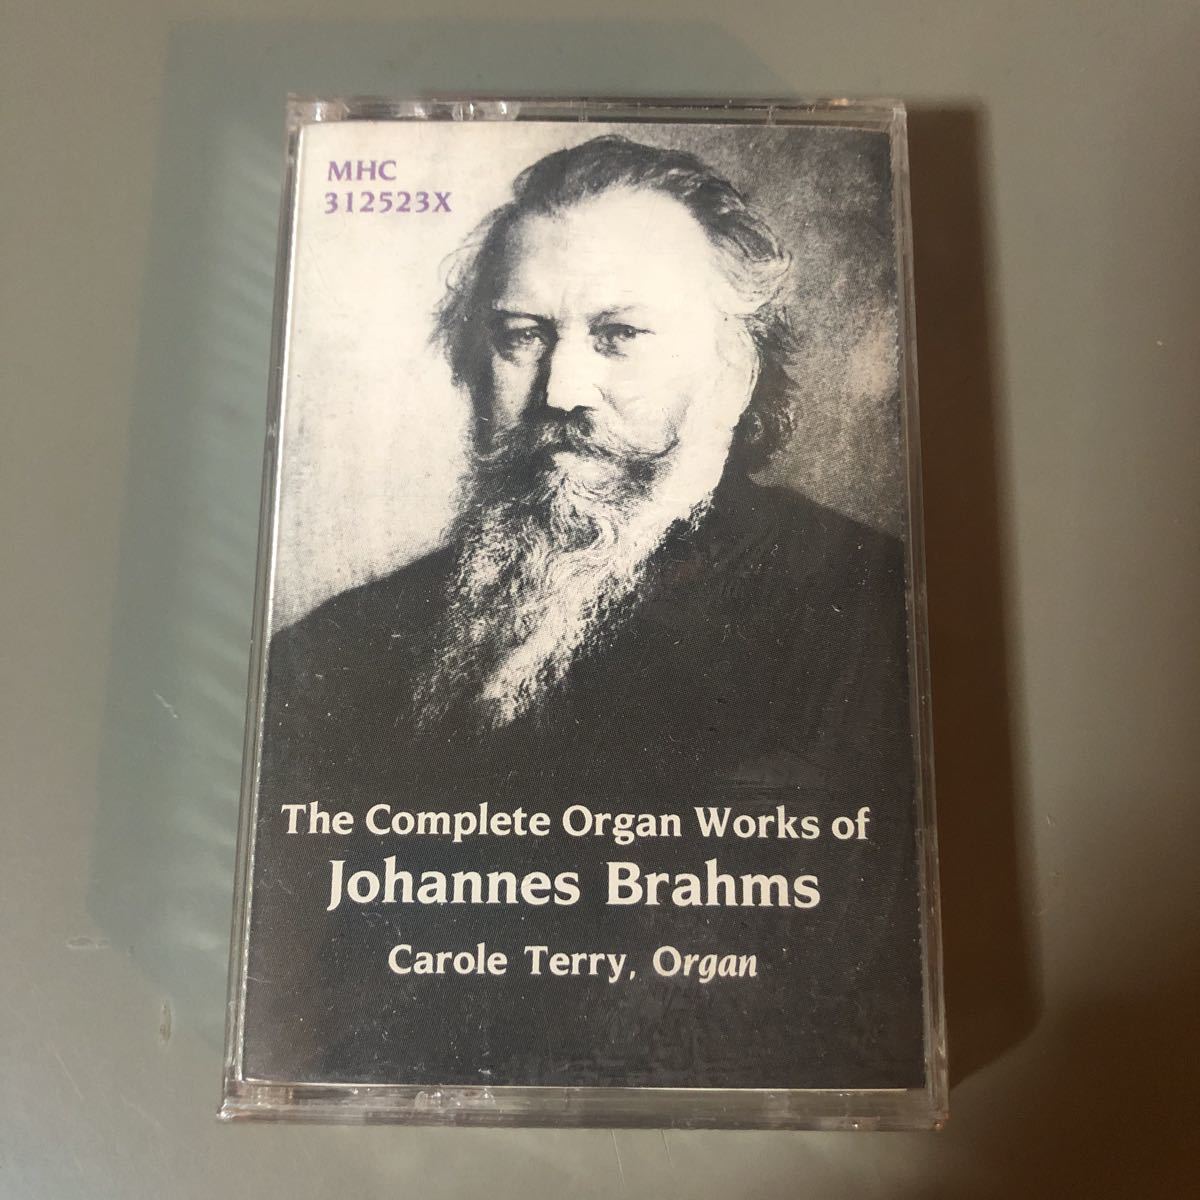 bla-msthe complete organ works Carole Terry organ foreign record cassette tape [ unopened new goods ]^